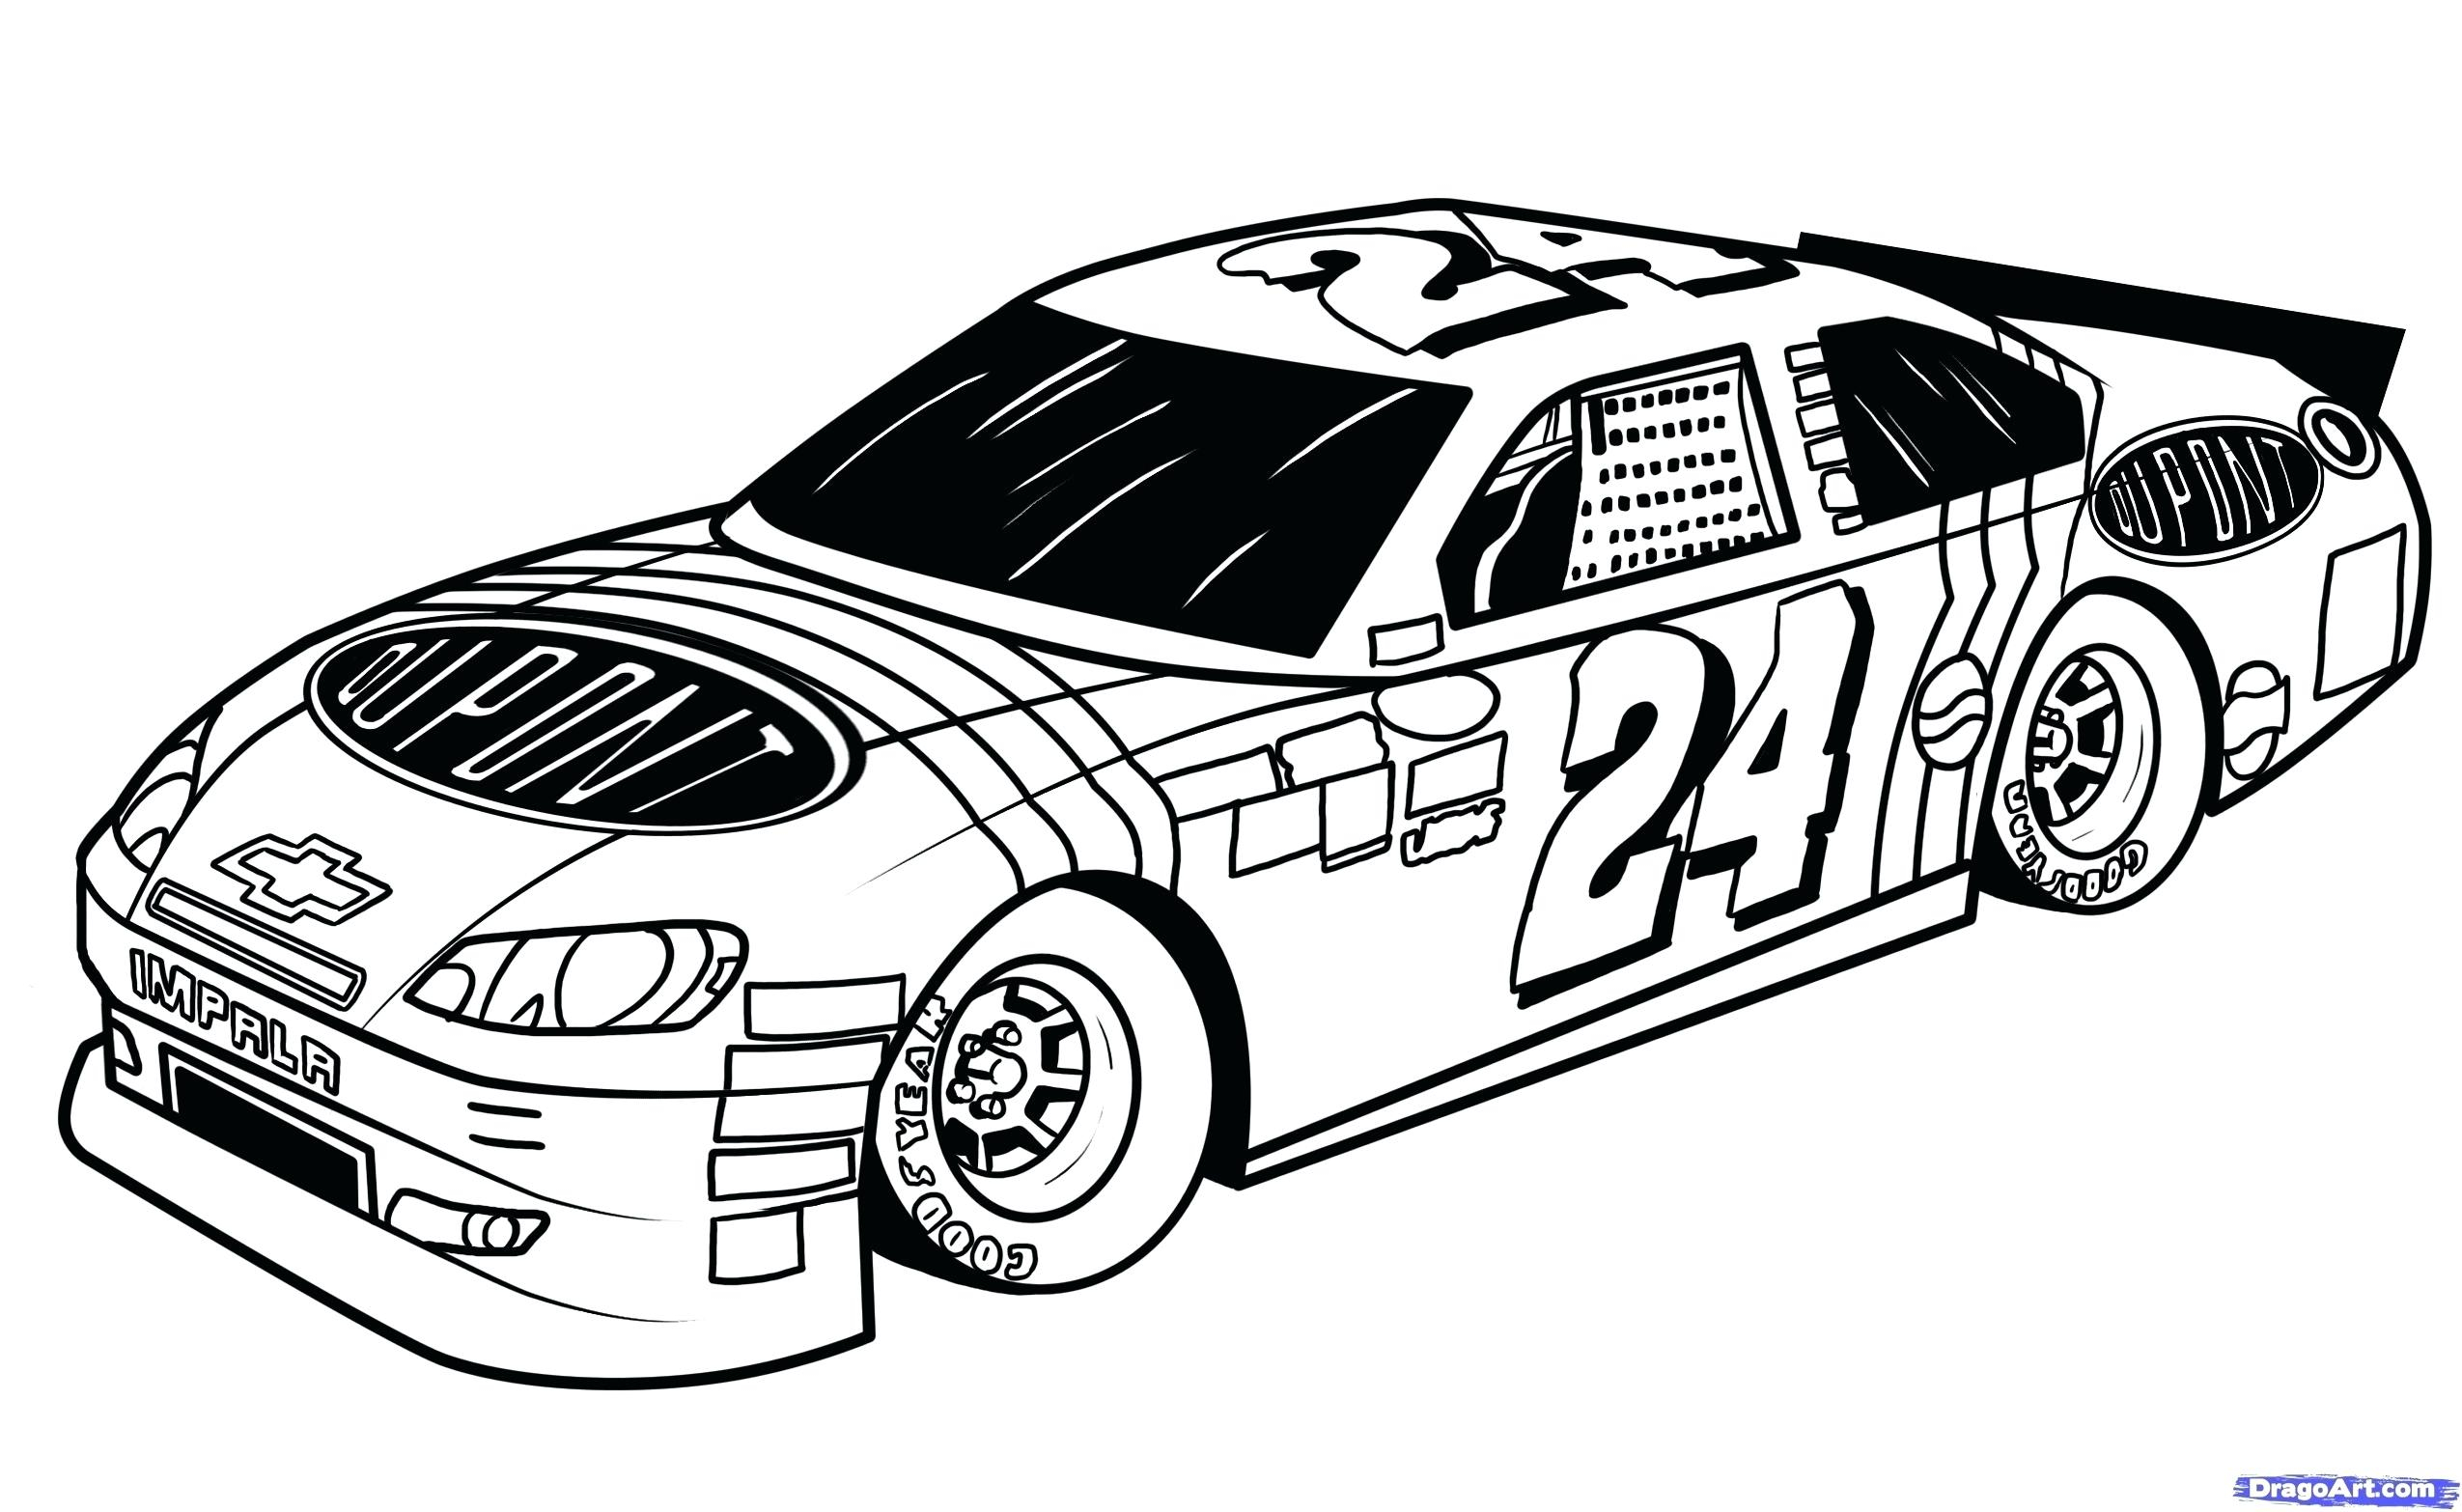 Drag Car Coloring Pages Der Coloring Pages Chamberprintco